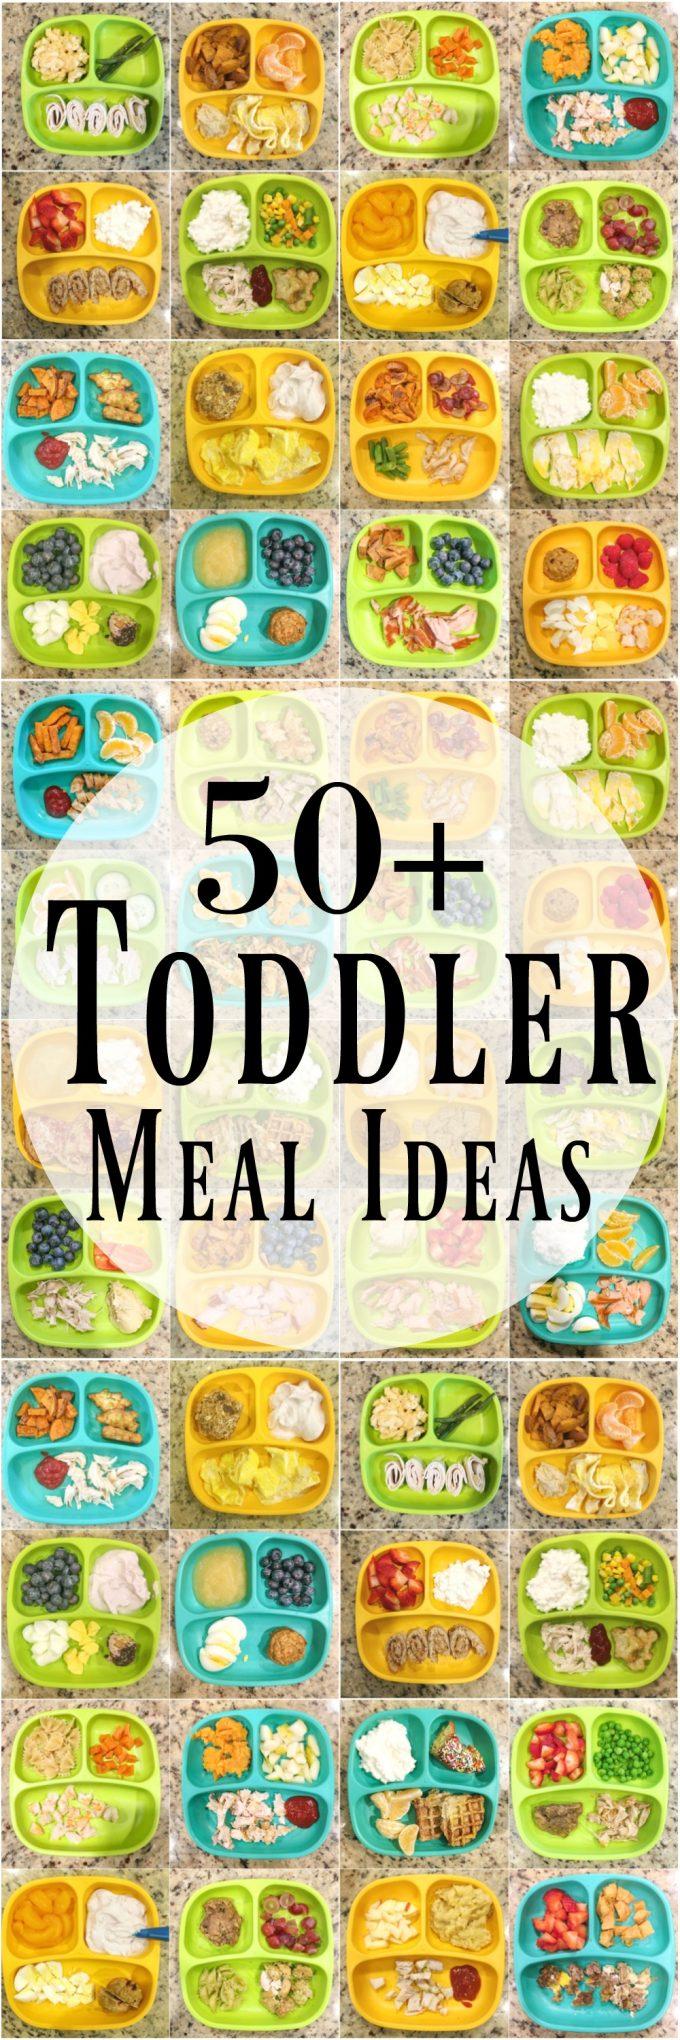 Need some healthy toddler meal ideas? Here are 50 kid-friendly ideas for breakfast, lunch and dinner to help inspire you if you’re stuck in a rut!